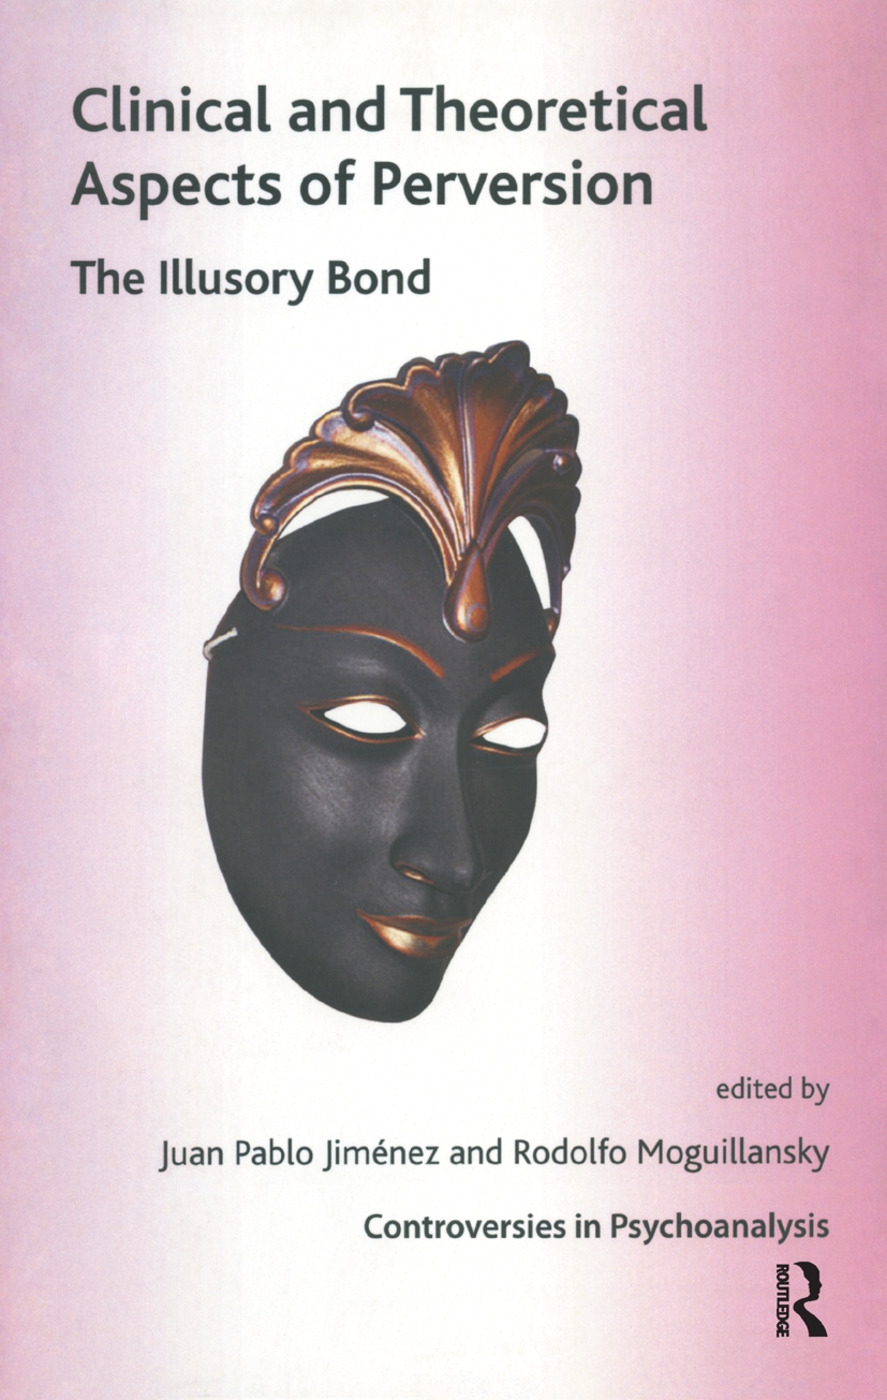 Clinical and Theoretical Aspects of Perversion: The Illusory Bond